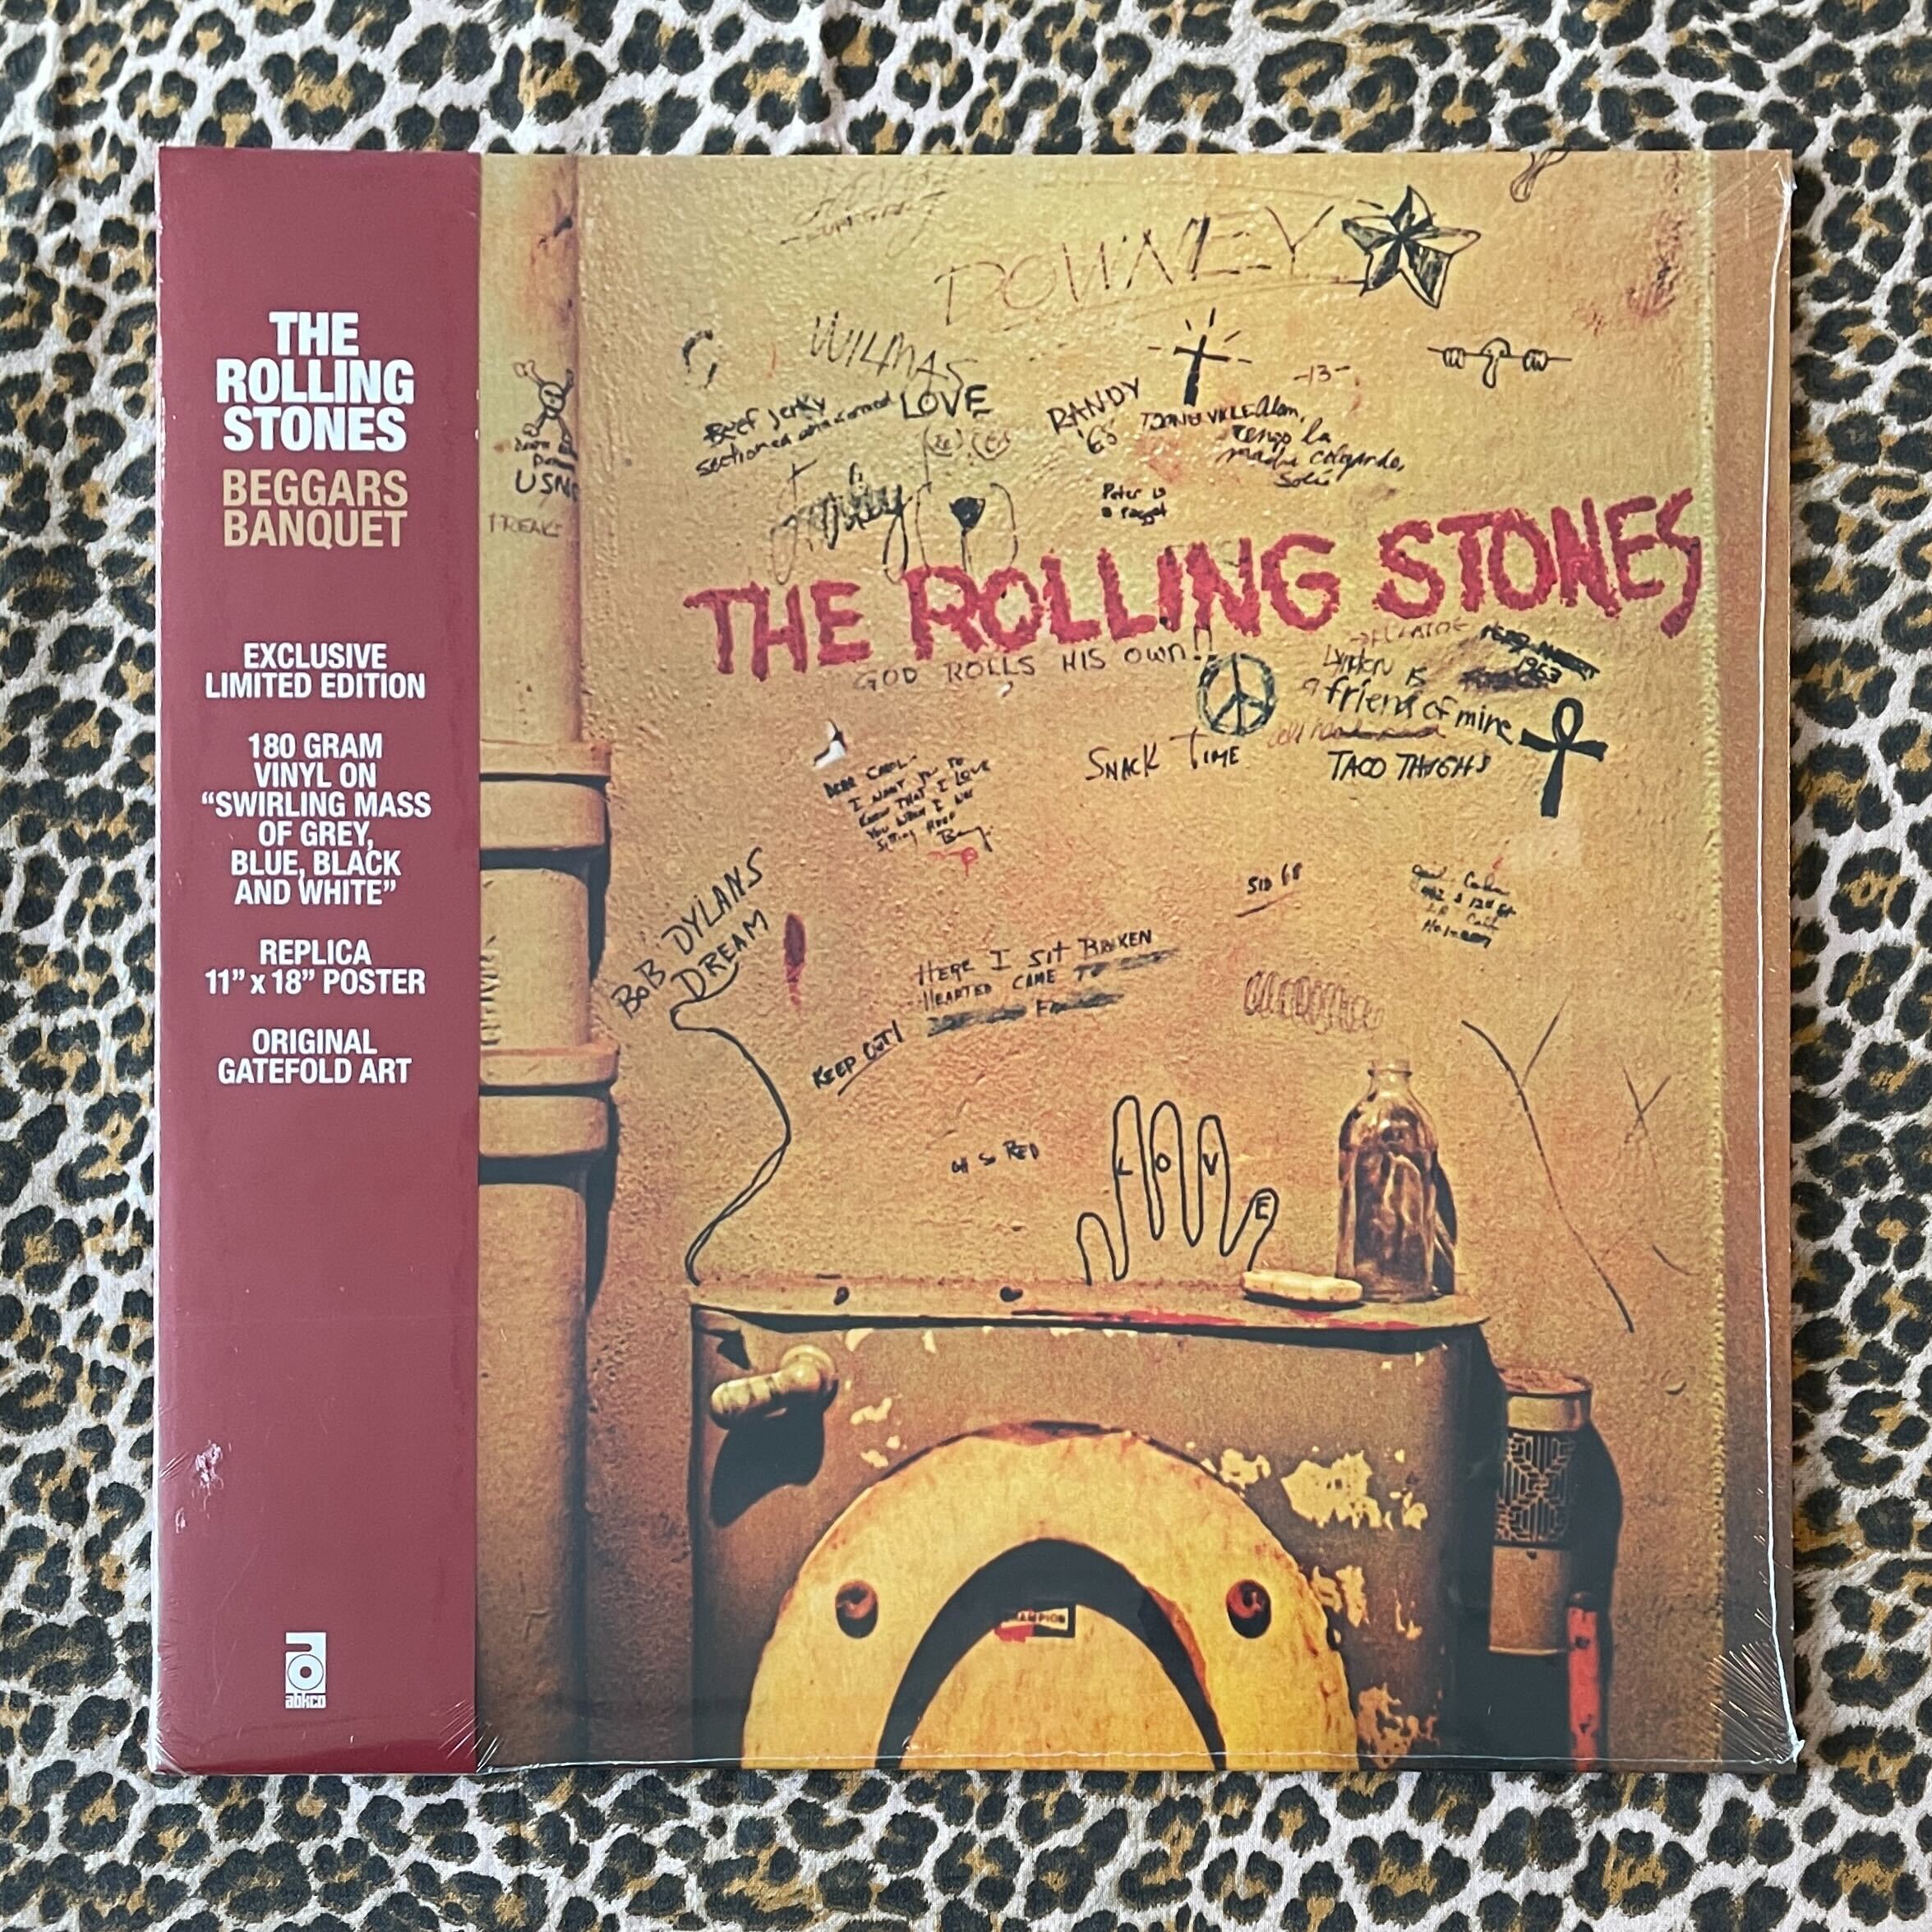 THE ROLLING STONES BEGGARS BANQUET - 洋楽